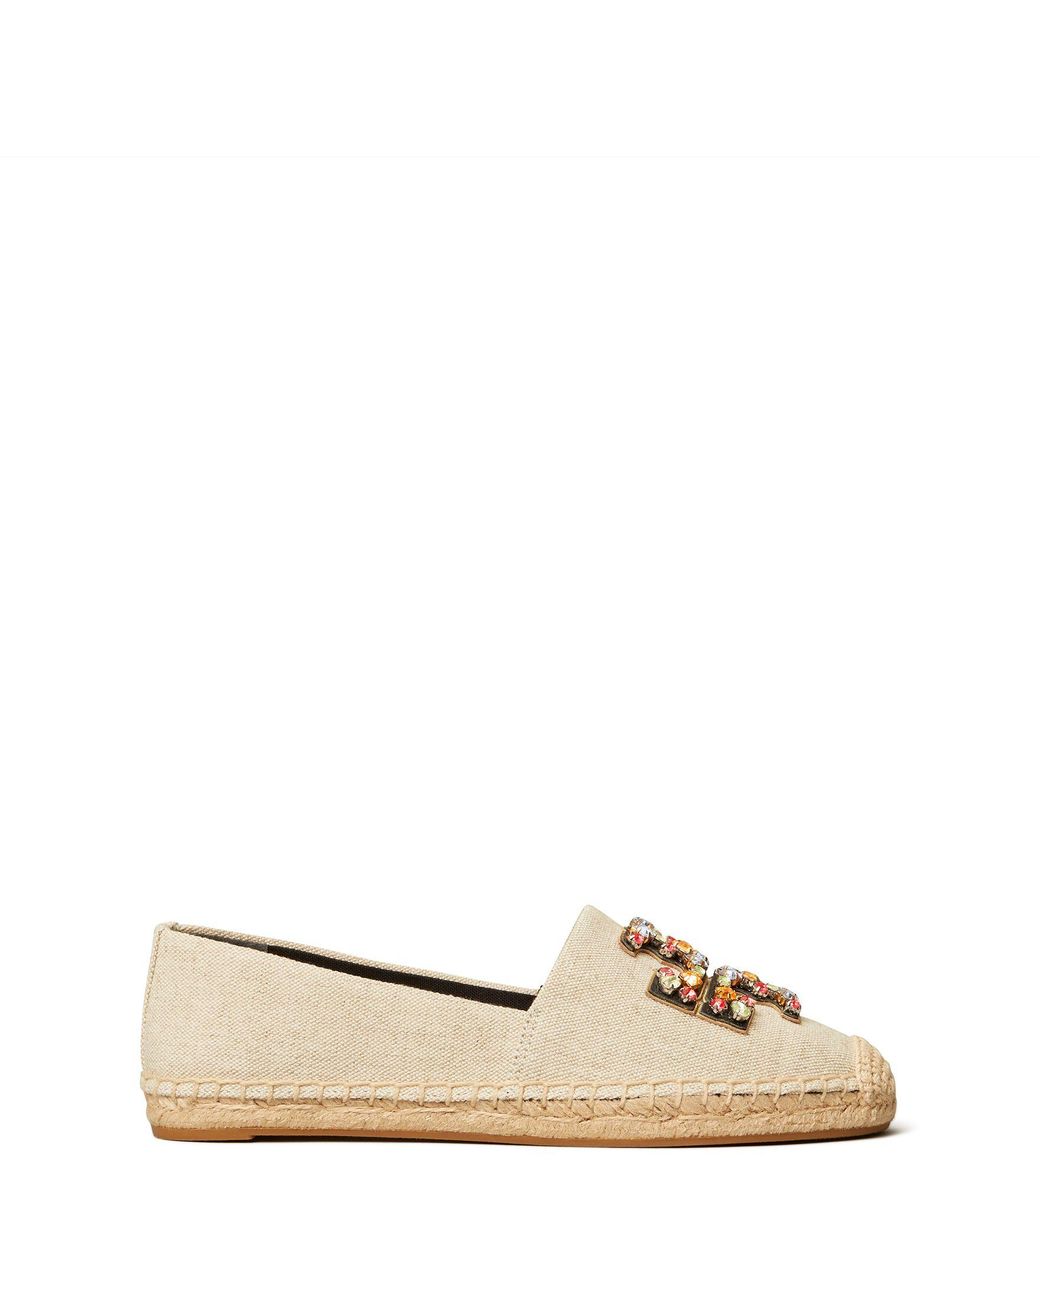 Tory Burch Ines Embellished Leather & Linen Espadrilles in Natural | Lyst